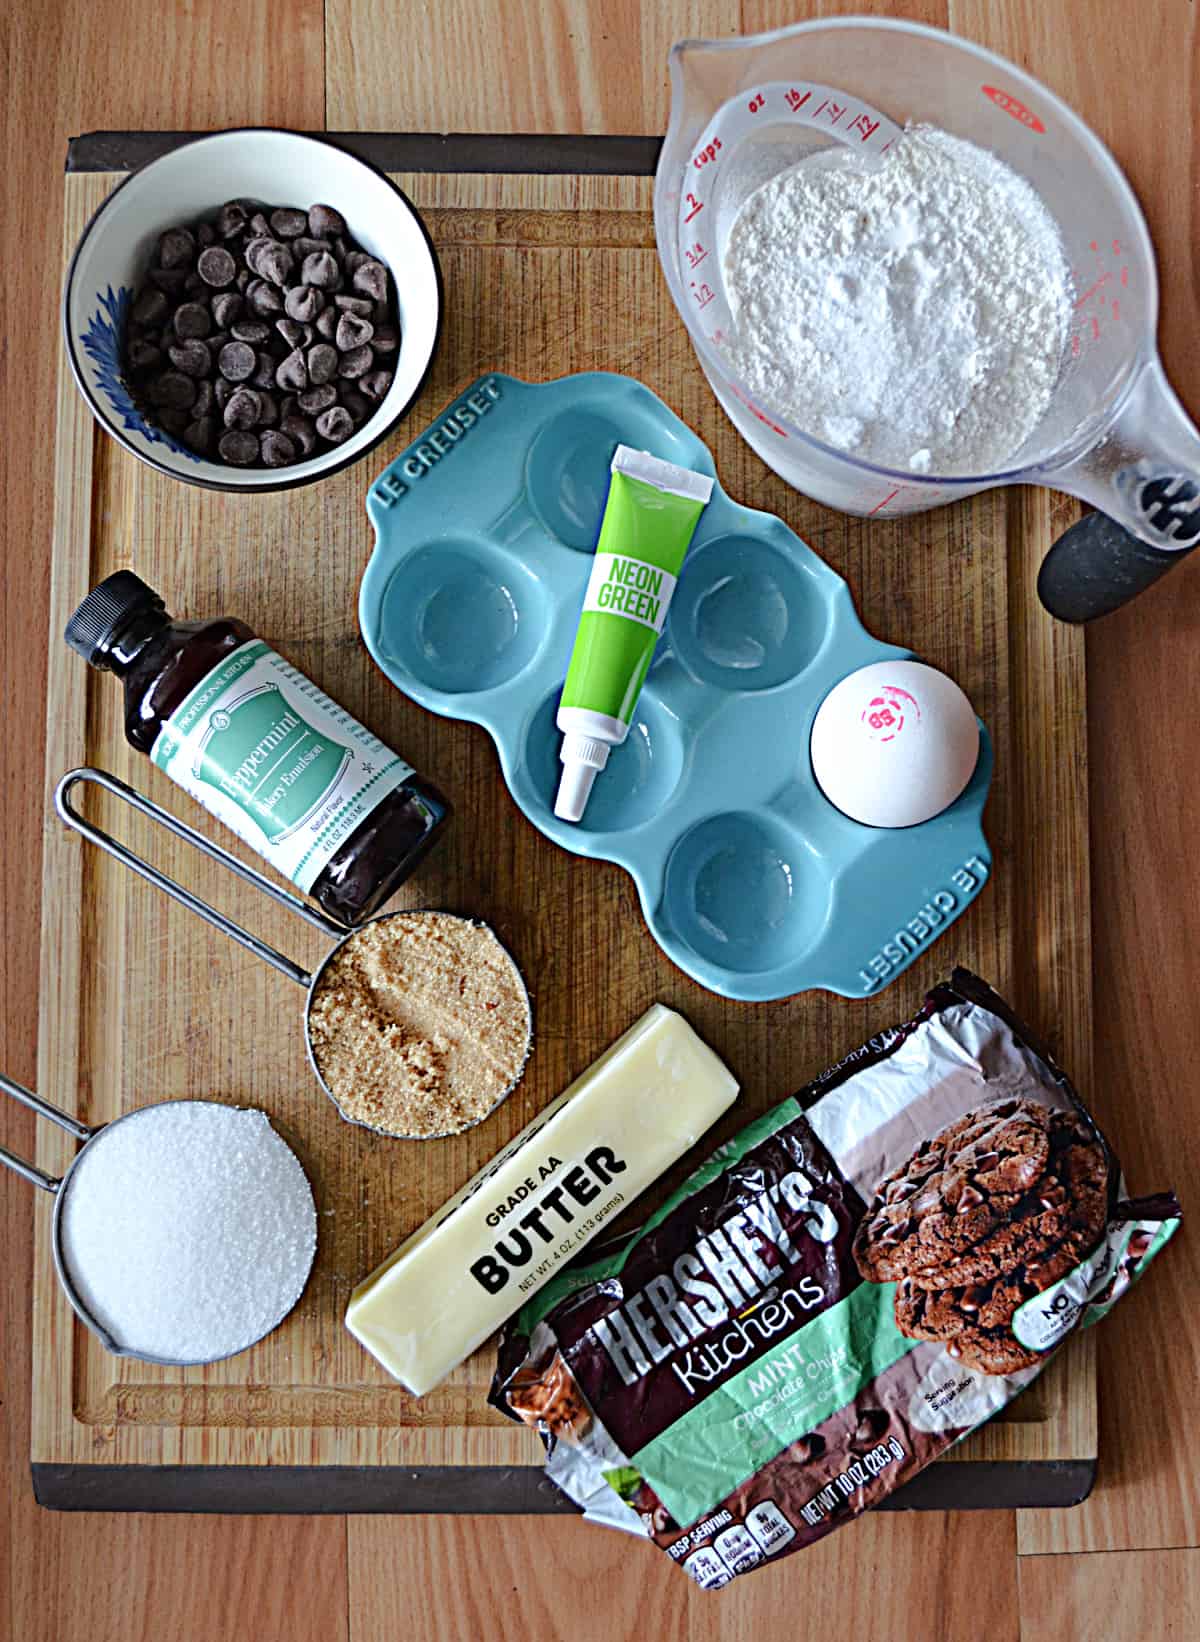 Everything you need to make Mint Chocolate Chip Cookies.